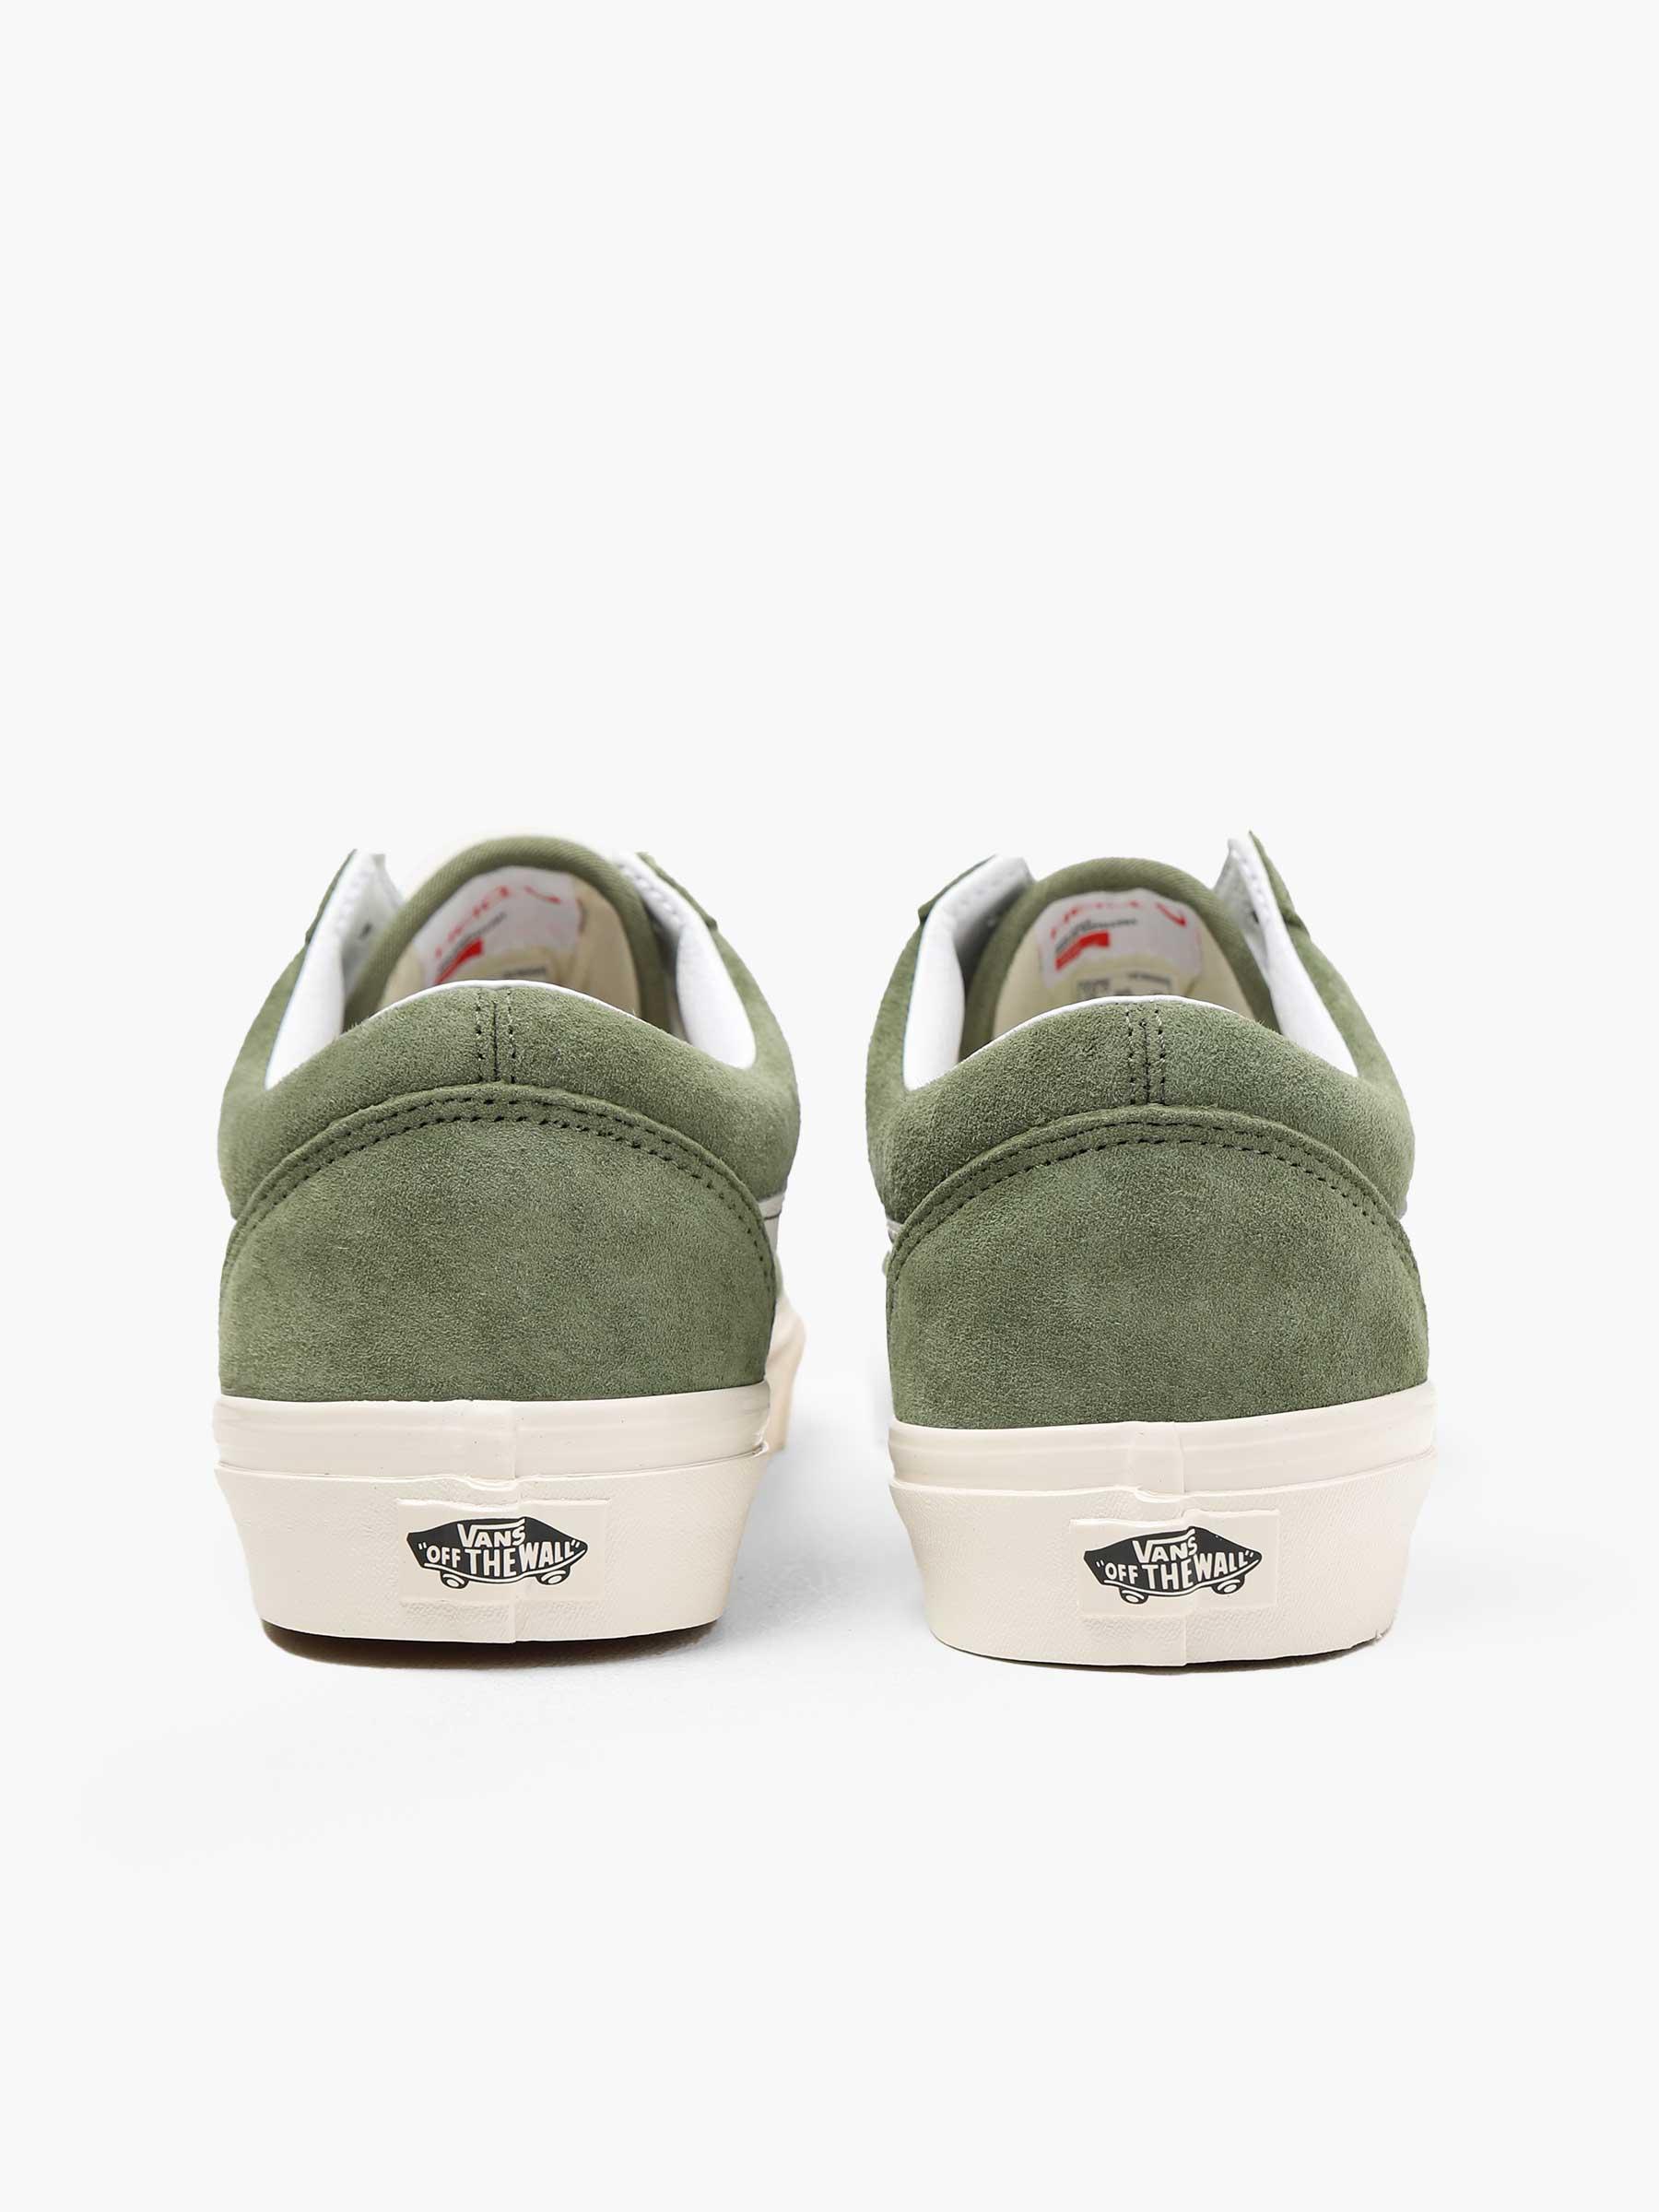 Old Skool 36 DX Pig Suede Loden Green VN0009QFZBF1